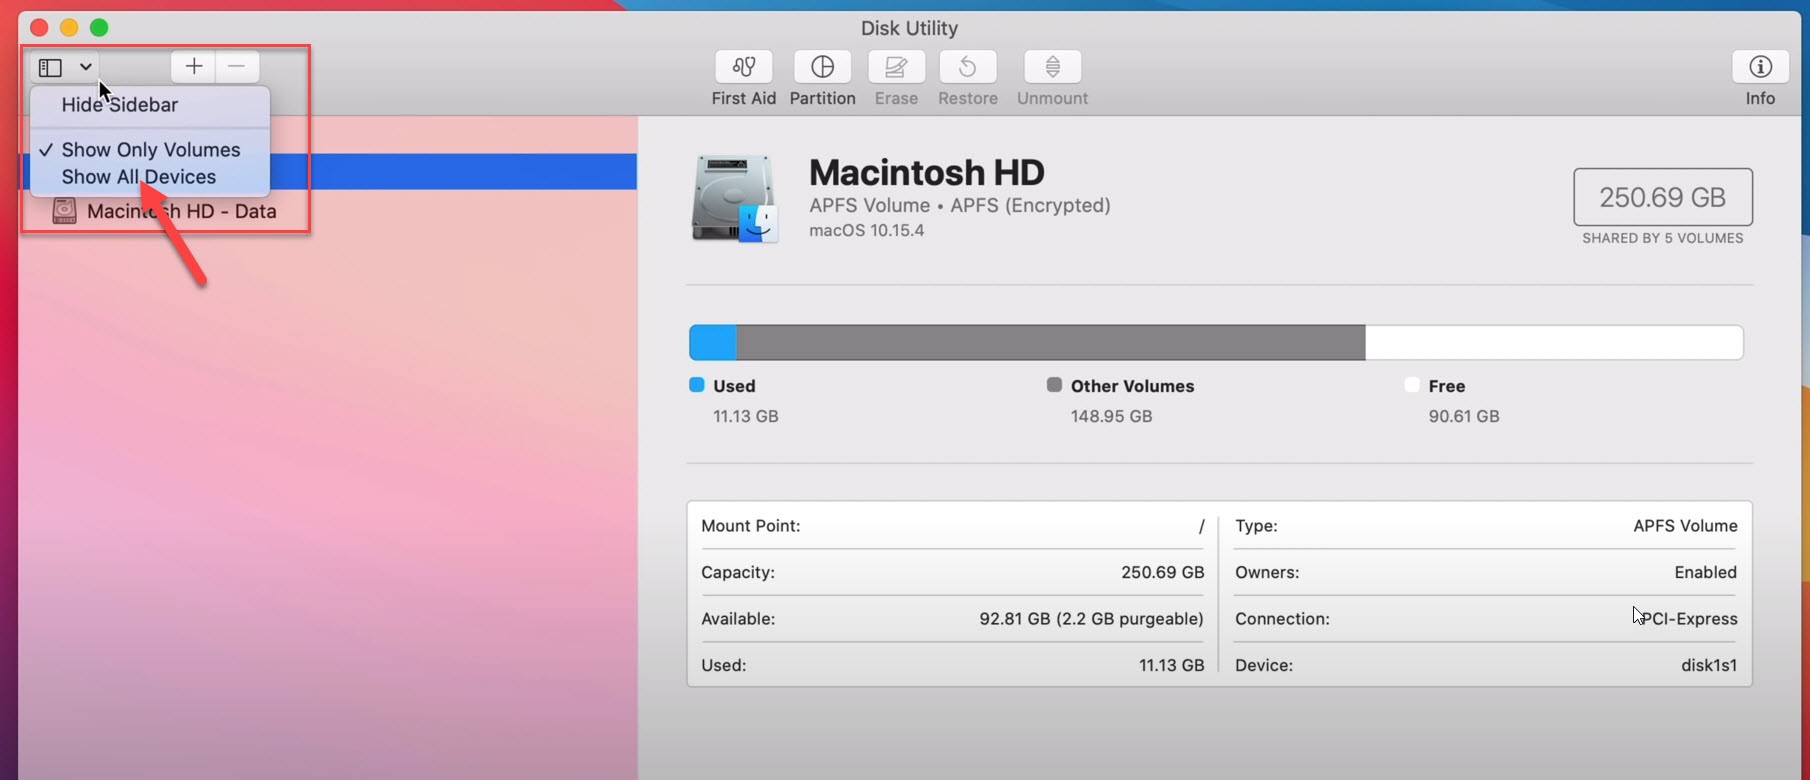 Show all Device on Disk utility